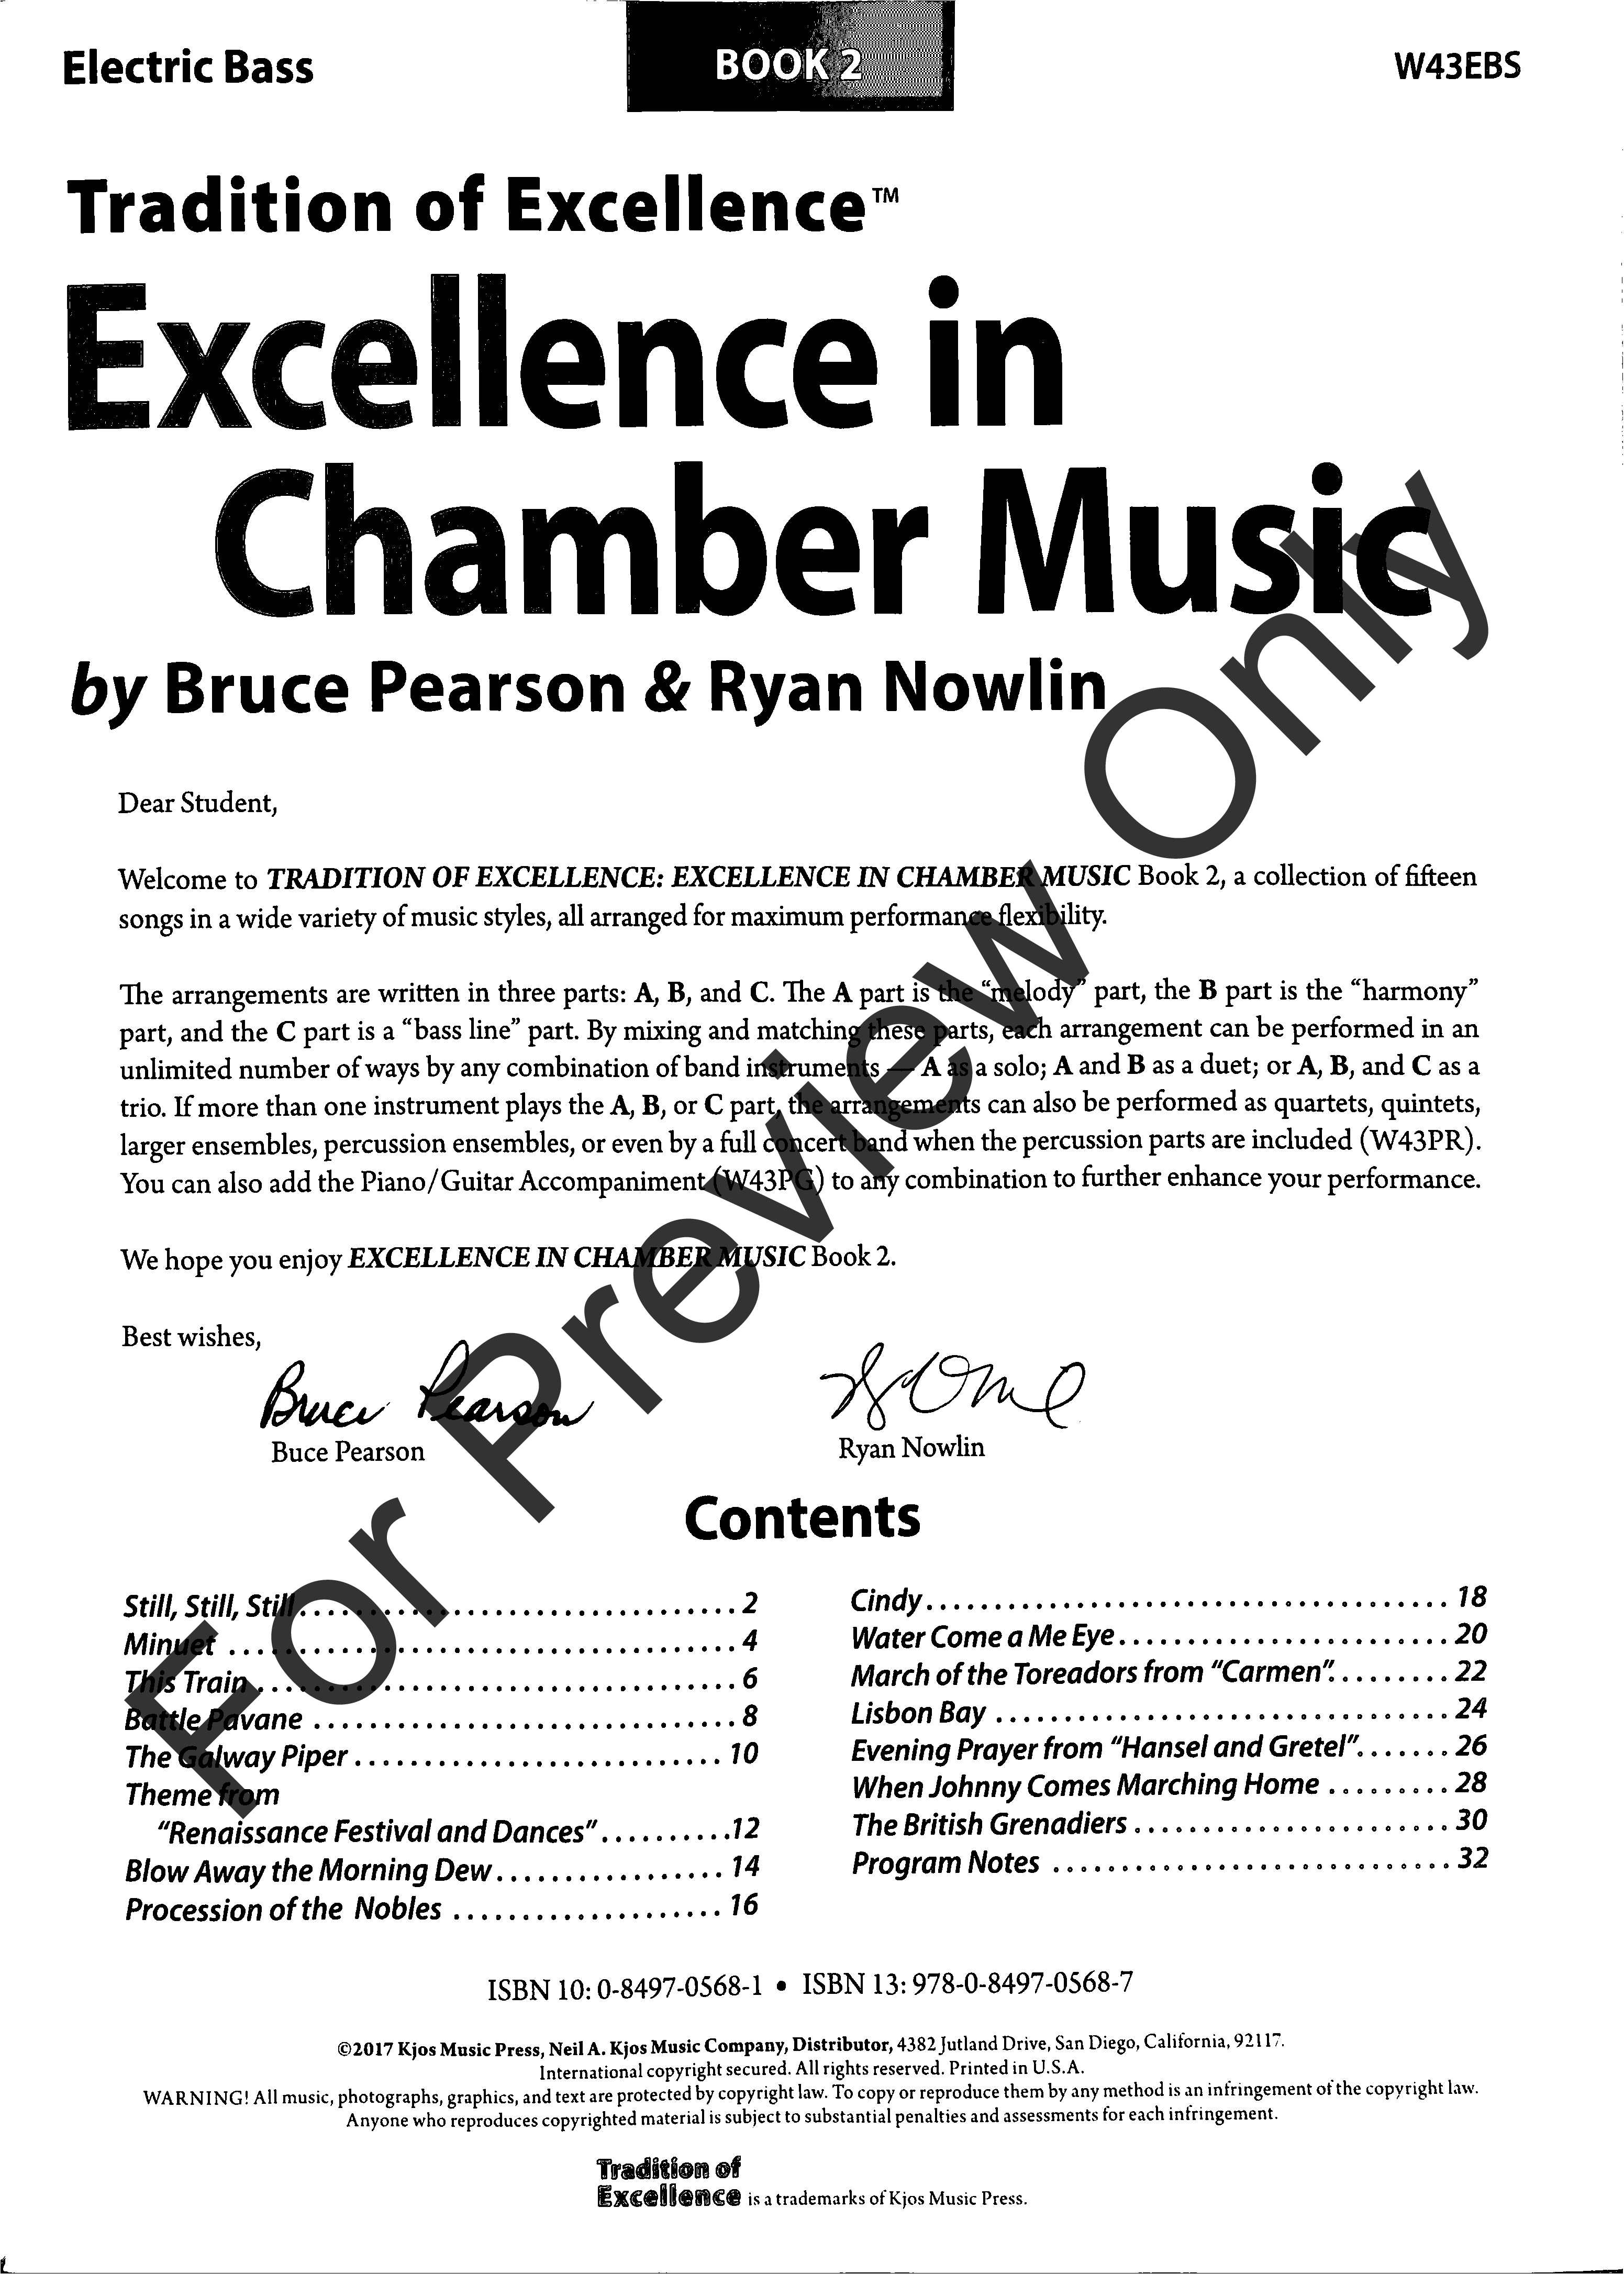 Excellence in Chamber Music #2 Electric Bass Guitar Book